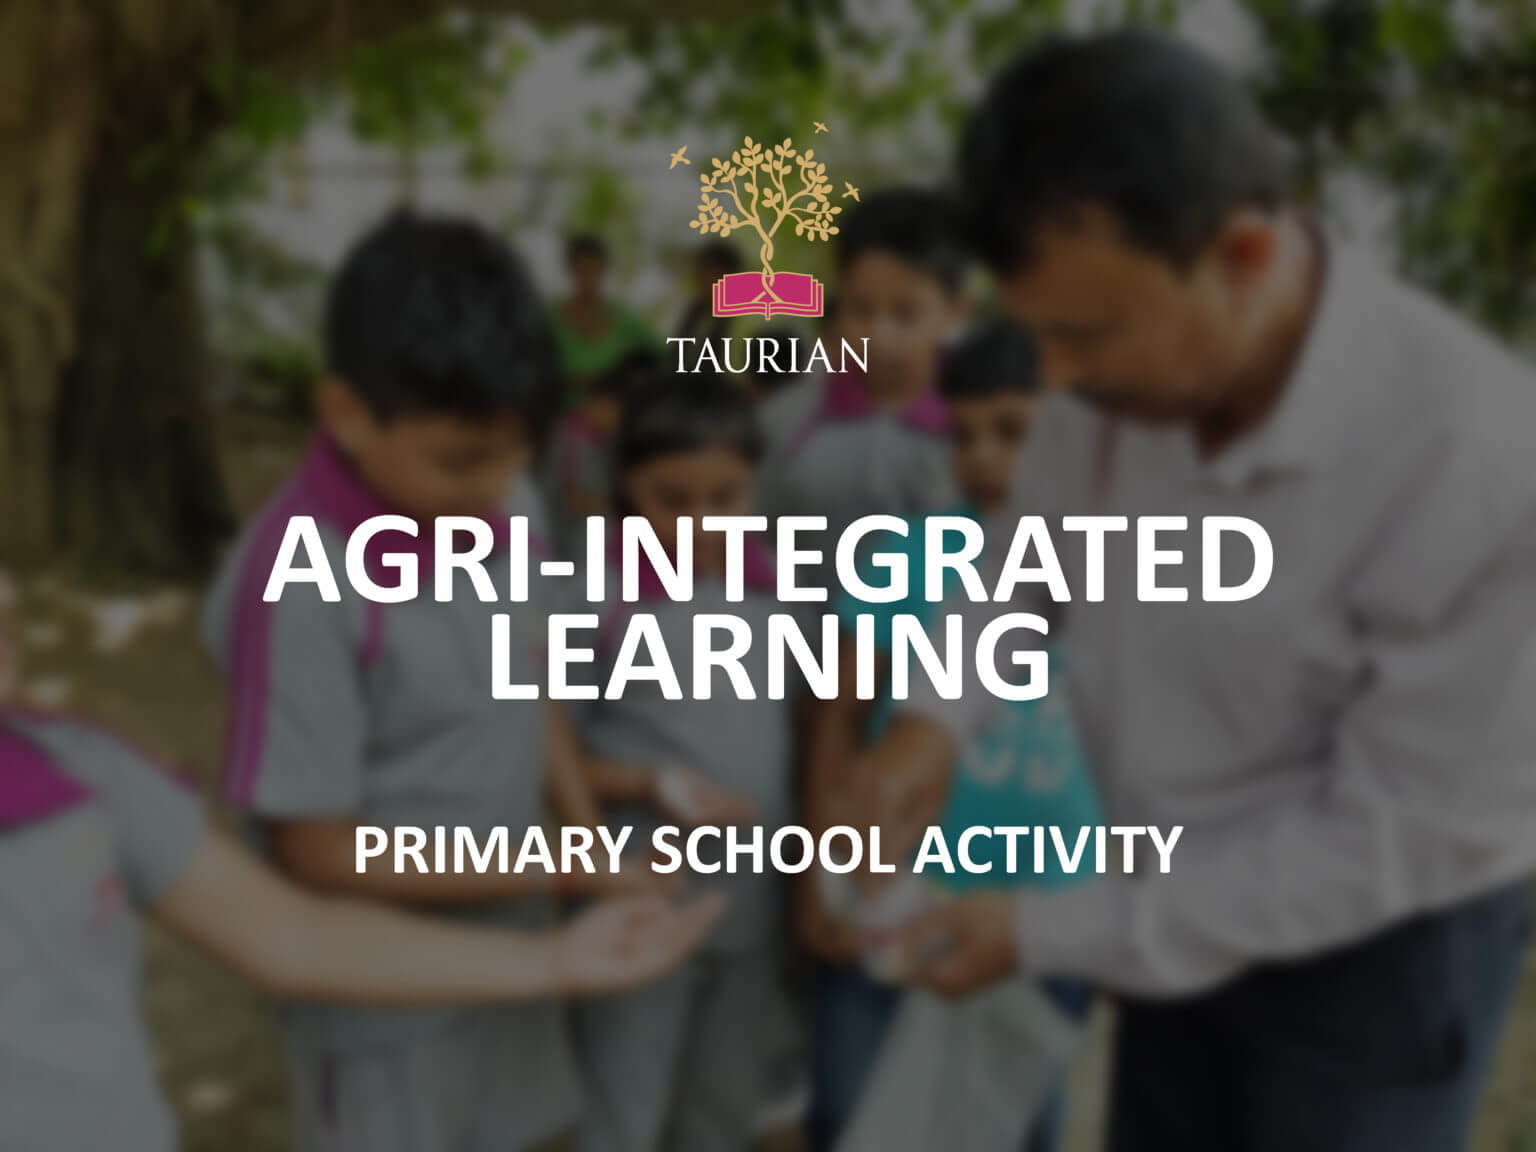 Primary School Students at Agri learning